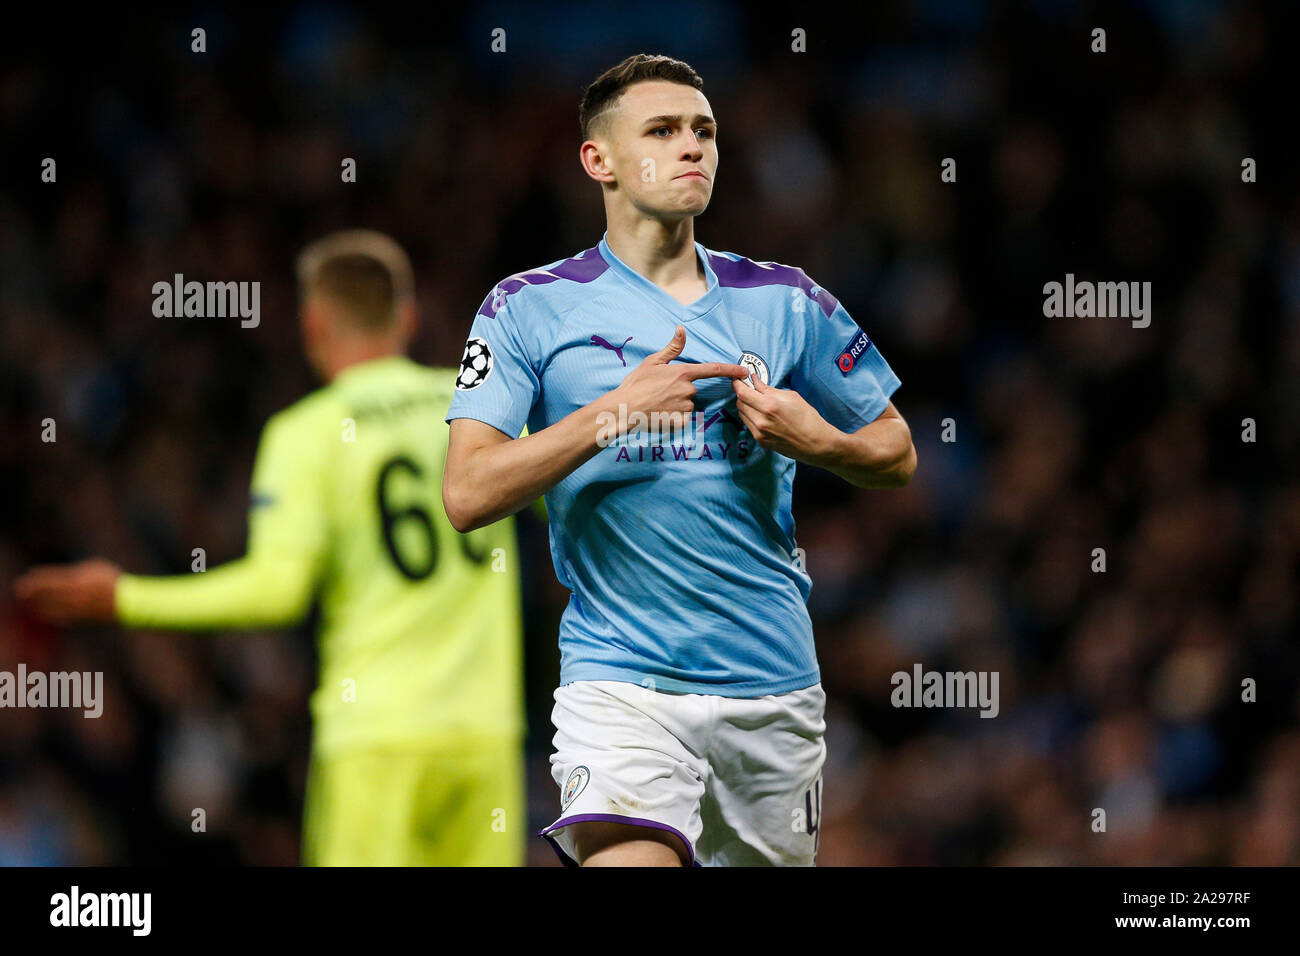 Manchester, UK. 01st Oct, 2019. Phil Foden of Manchester City celebrates after scoring his side's second goal to make the score 2-0 during the UEFA Champions League Group C match between Manchester City and Dinamo Zagreb at the Etihad Stadium on October 1st 2019 in Manchester, England. (Photo by Daniel Chesterton/phcimages.com) Credit: PHC Images/Alamy Live News Stock Photo